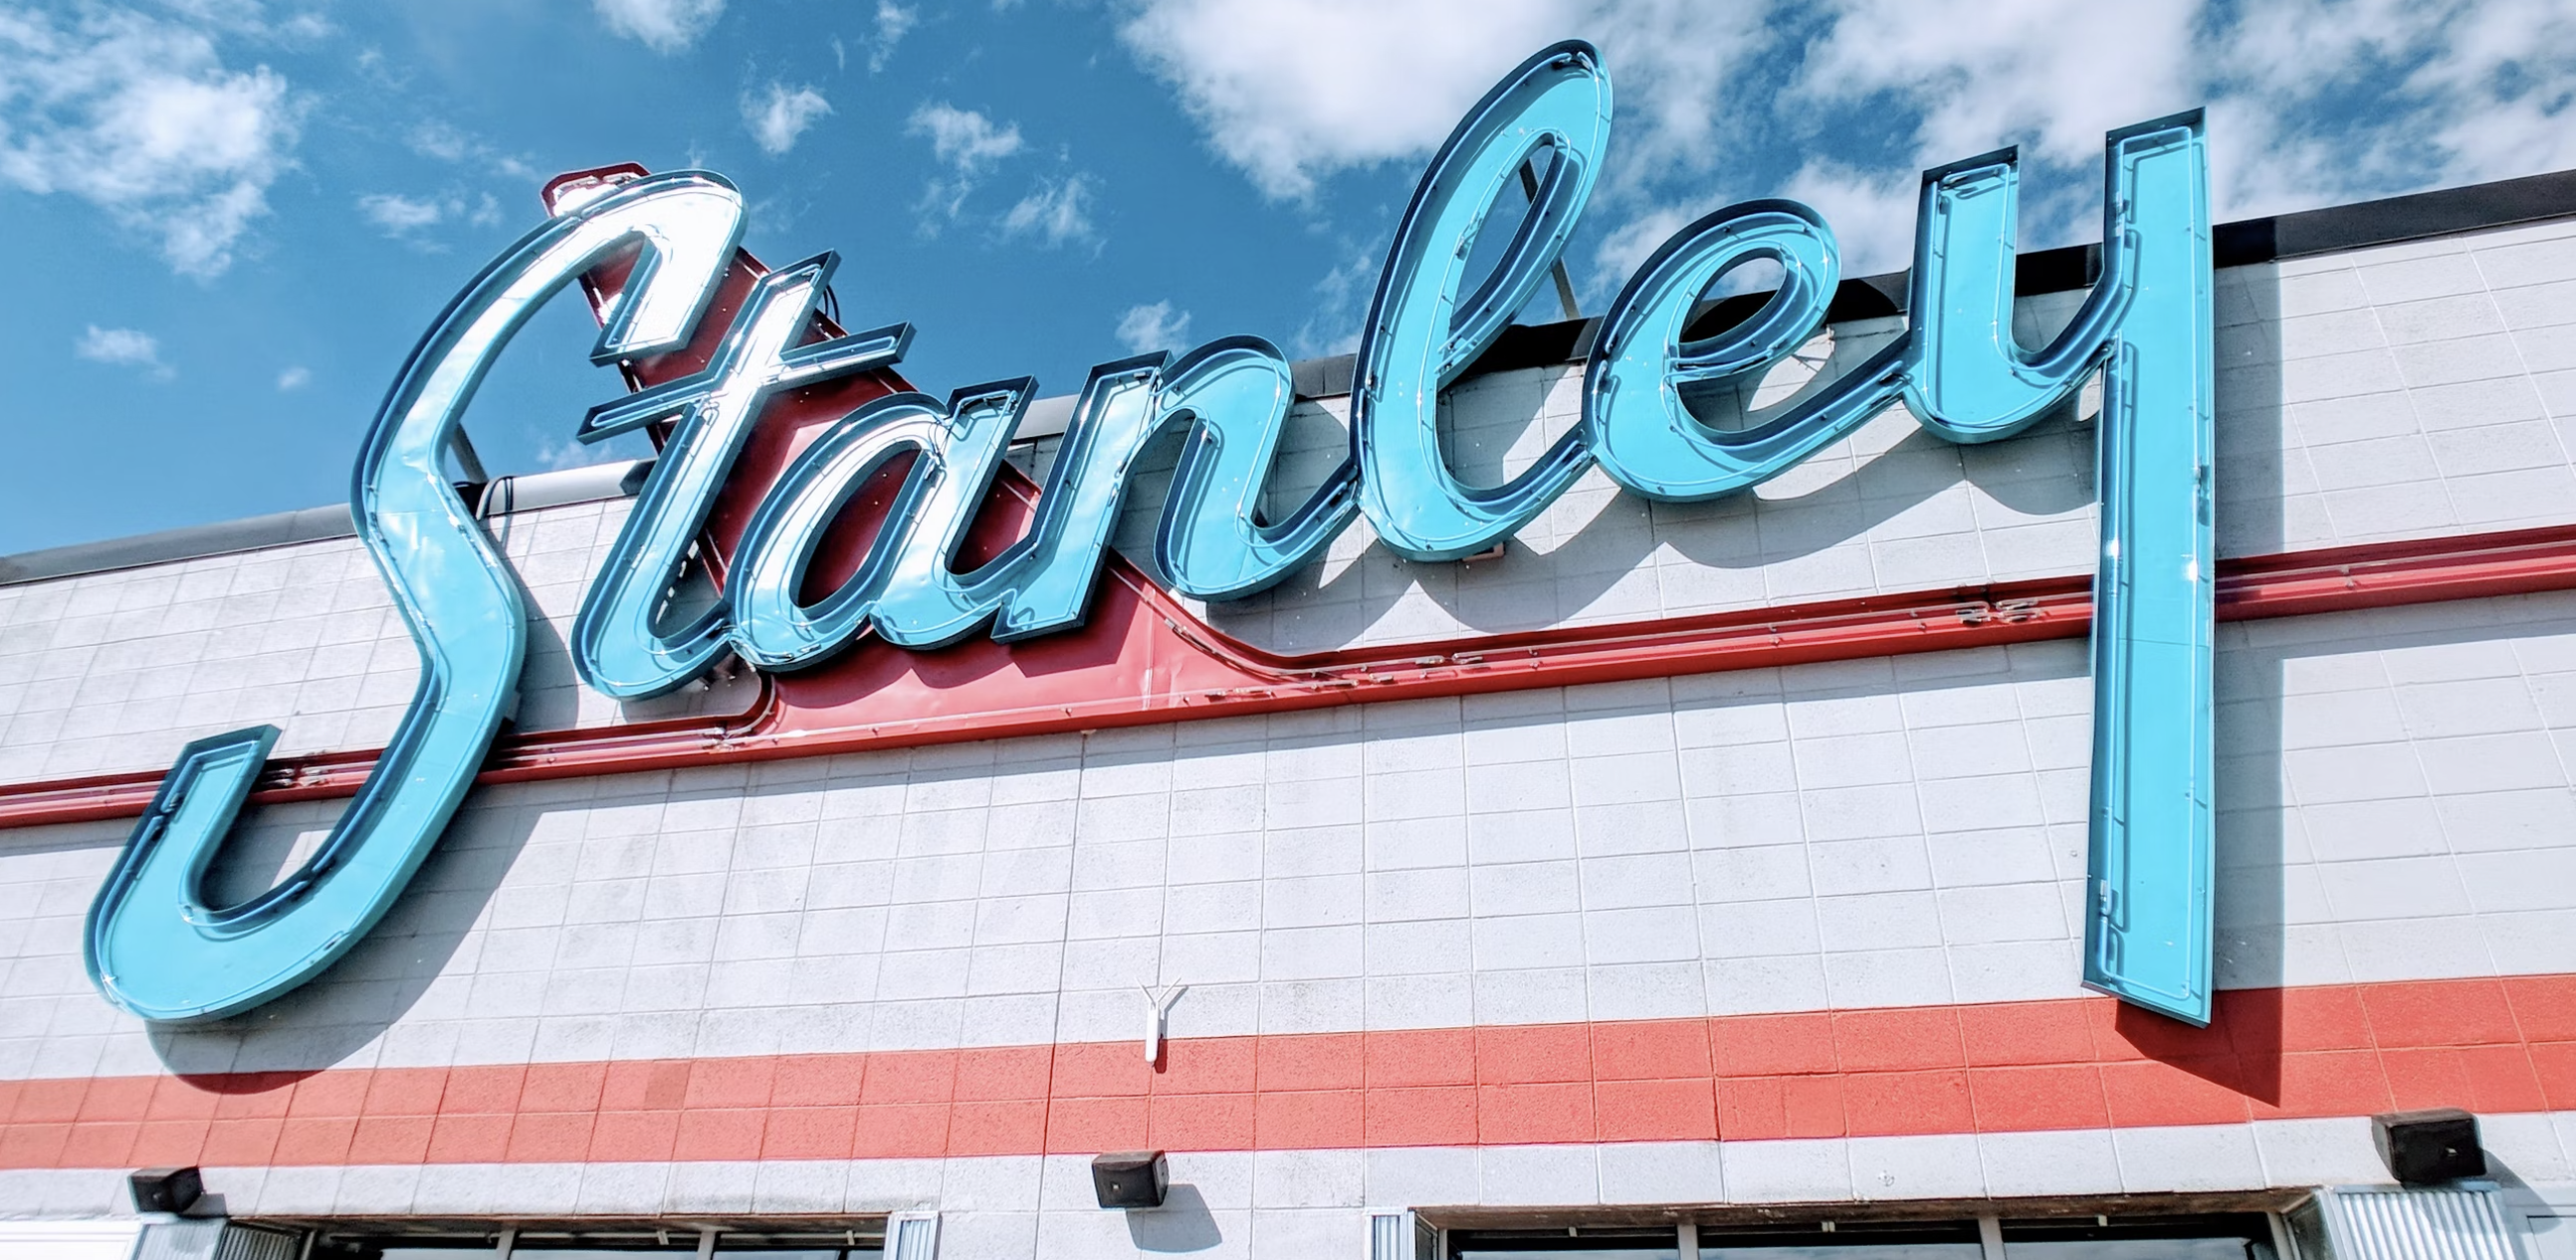 a custom storefront neon sign reading "Stanley" on a building.